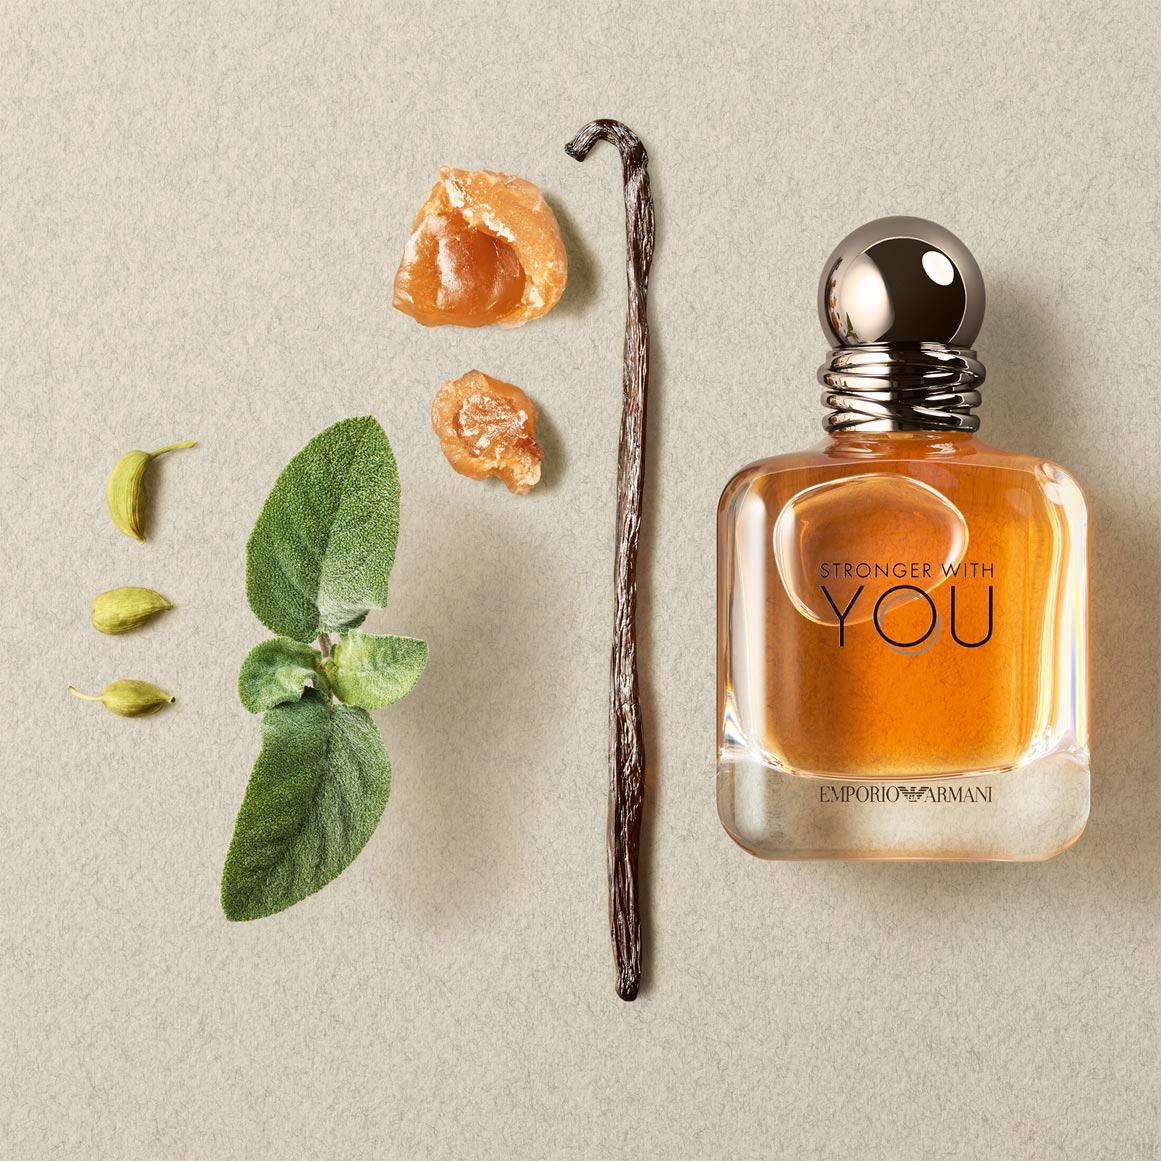 Emporio Armani Stronger With You – Detailed Review In 2023